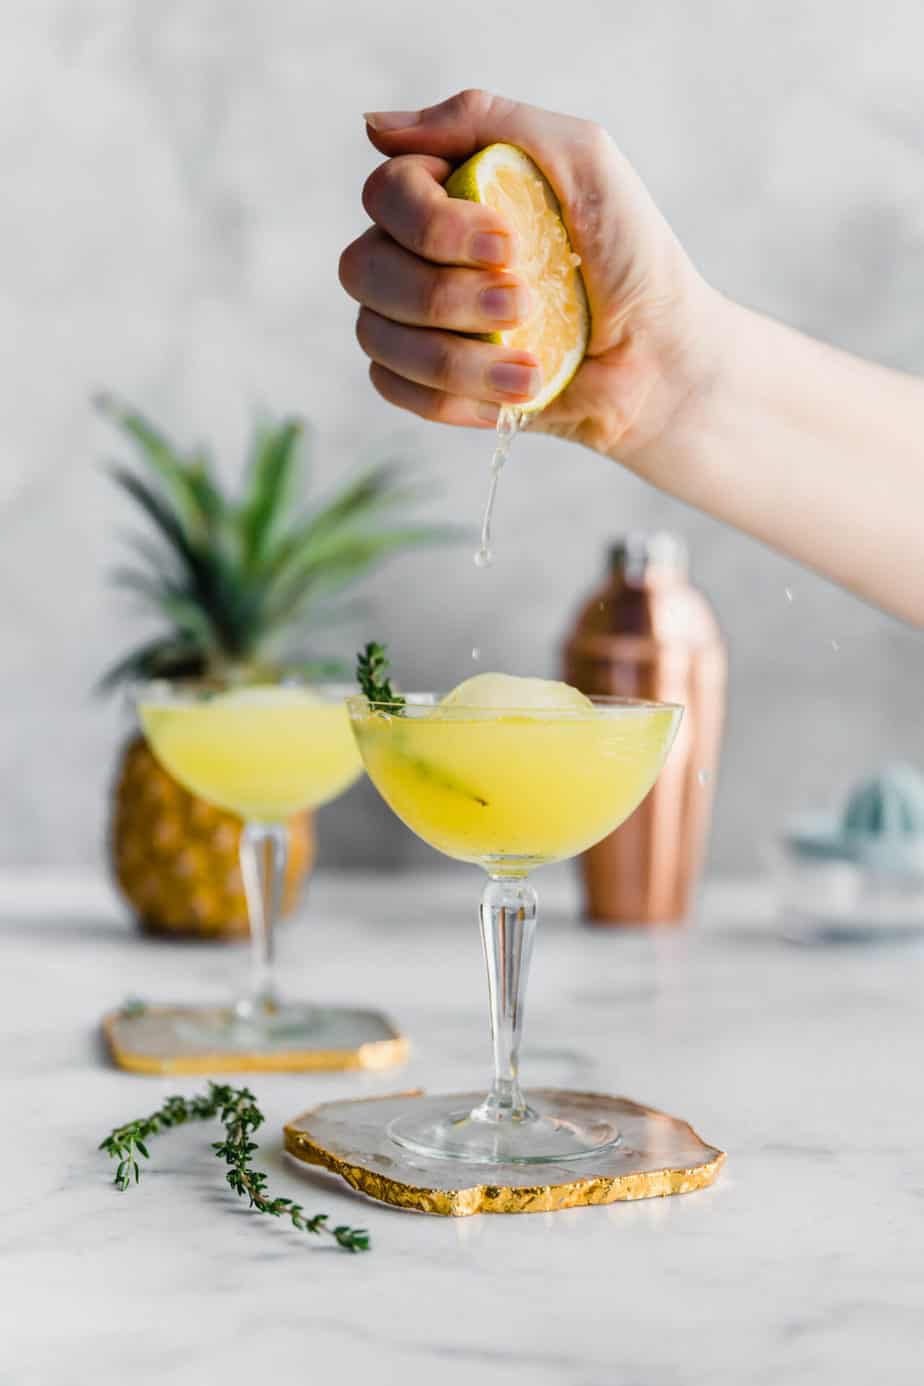 A hand squeezing a lemon into a vodka drink with pineapple.